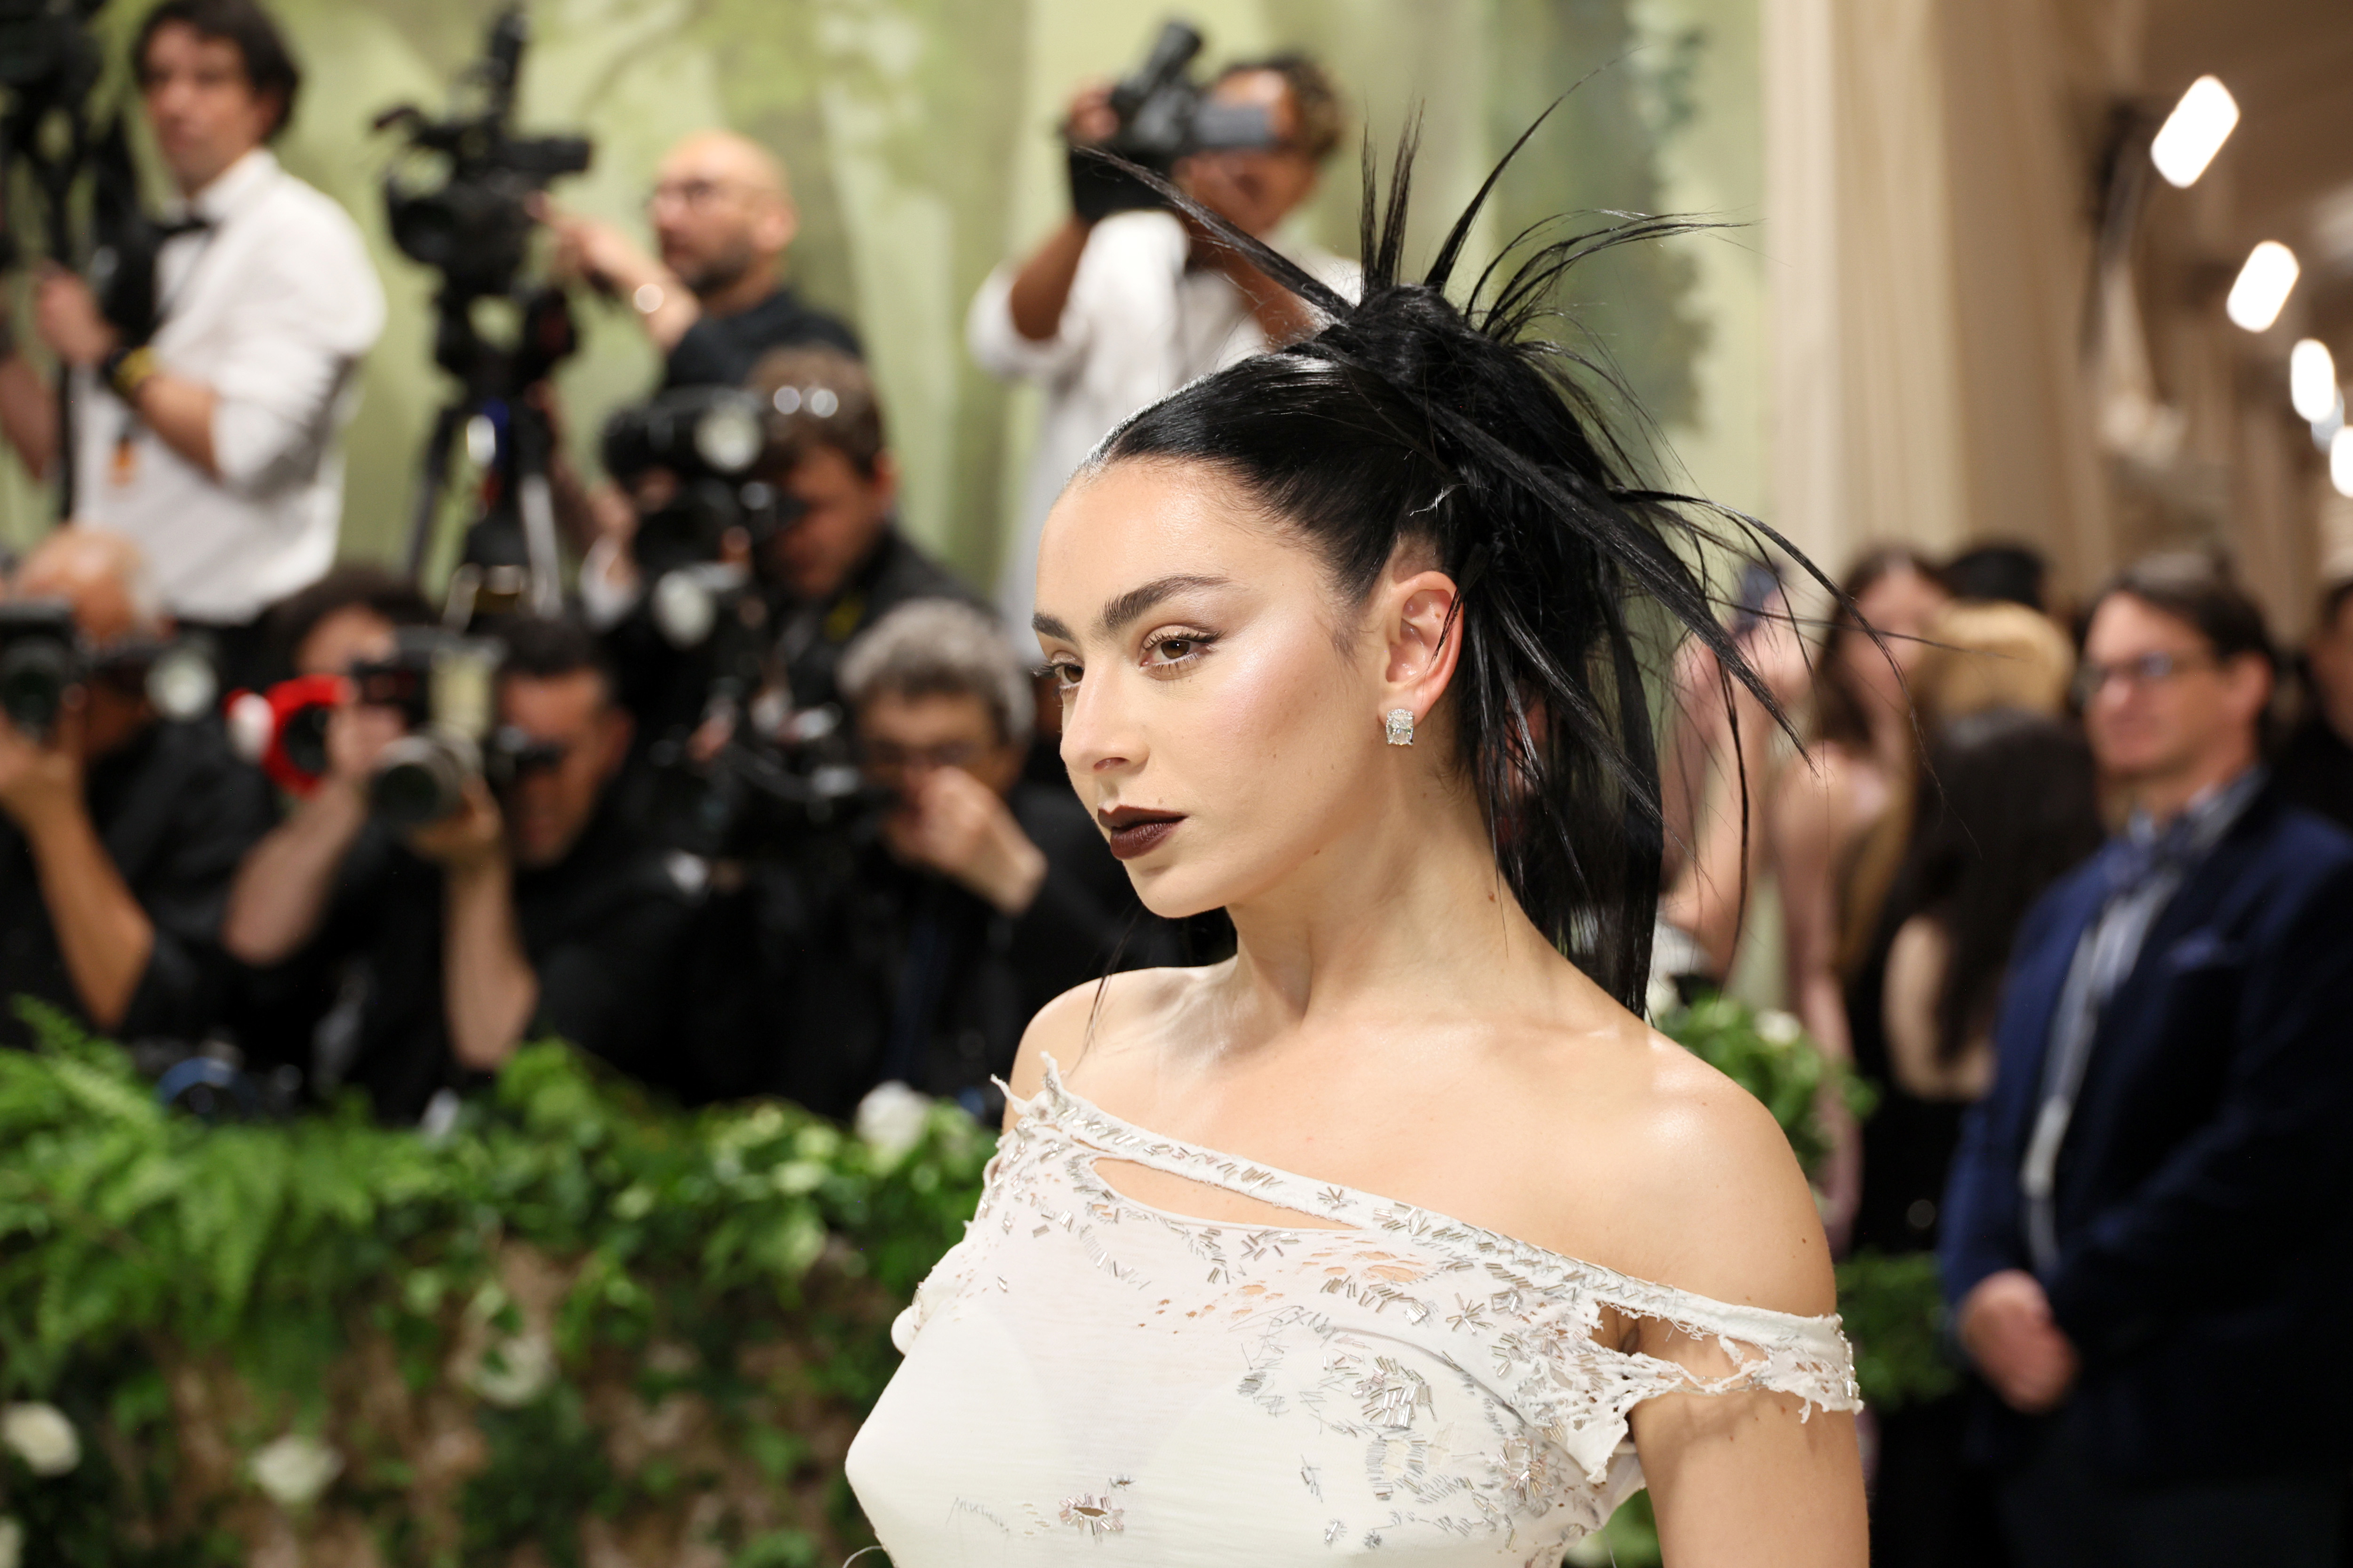 Charli XCX on the red carpet, wearing a white lace dress with off-the-shoulder design and elaborate black hairpiece, surrounded by photographers